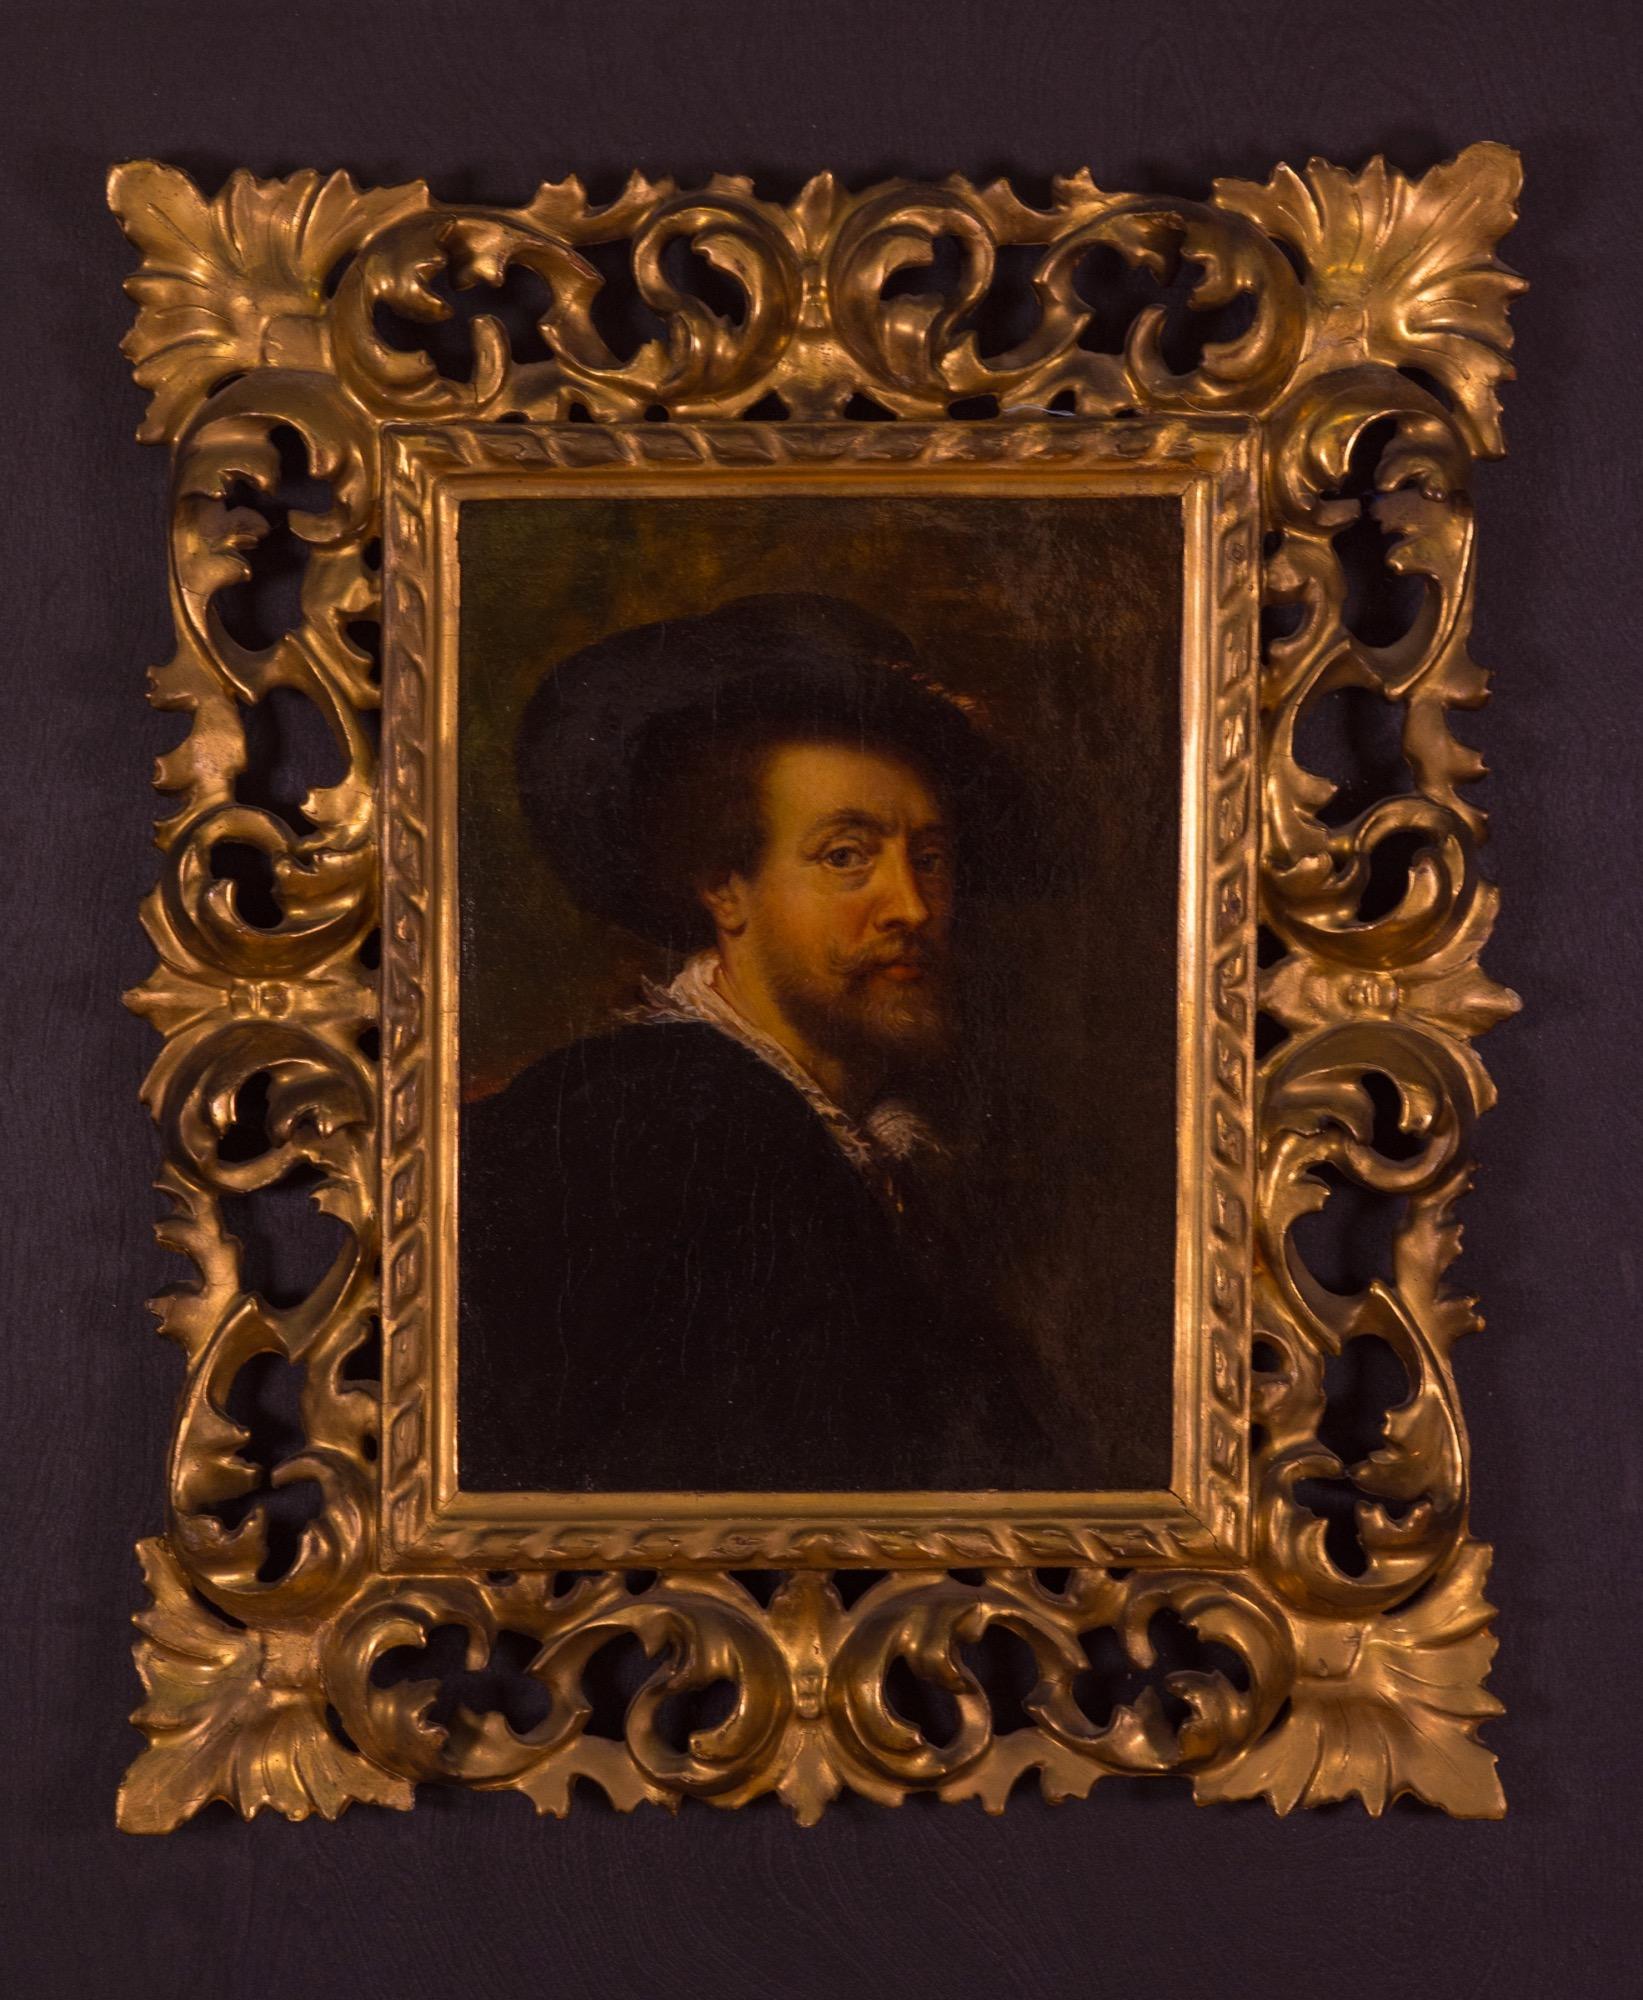 18th Centruy Dutch replica of the Self Portrait of Sir Peter Pail Reubens, original painted by Reubens in 1623, oil on canvas. With original hand carved and gold gilded frame. It has been mounted on a black hand painted panel framed with a